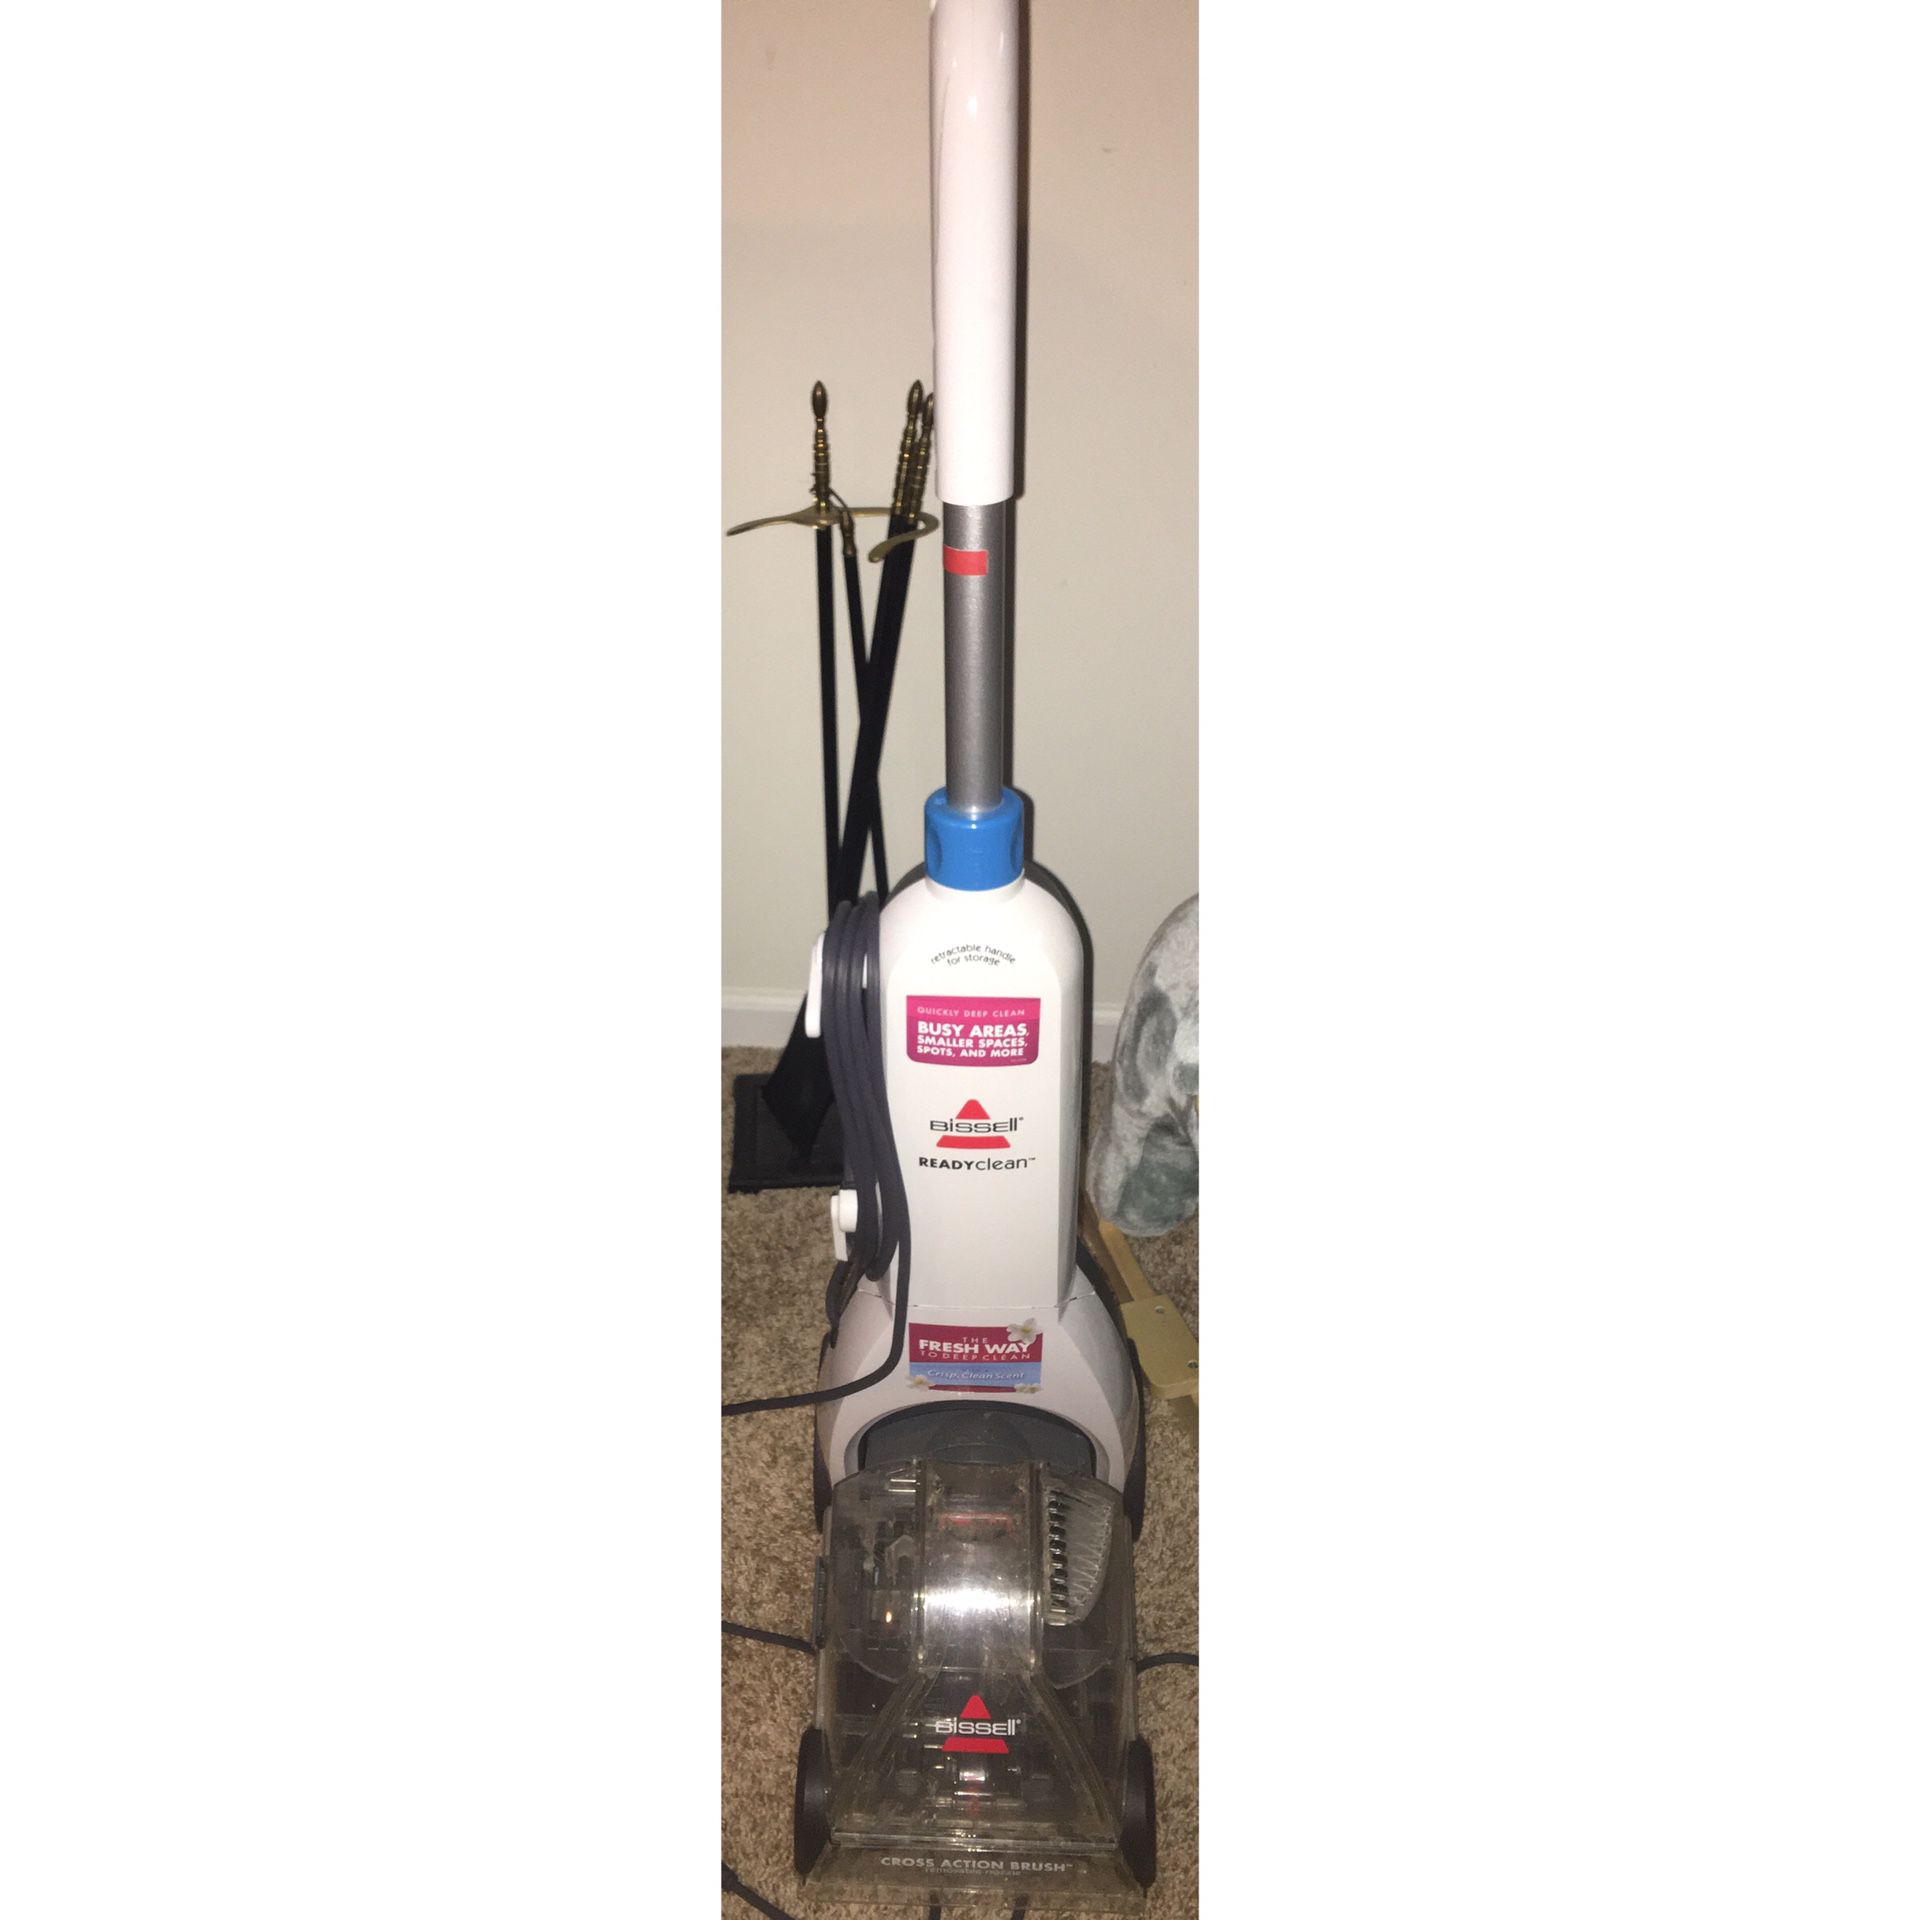 Bissell ready clean upright carpet cleaner